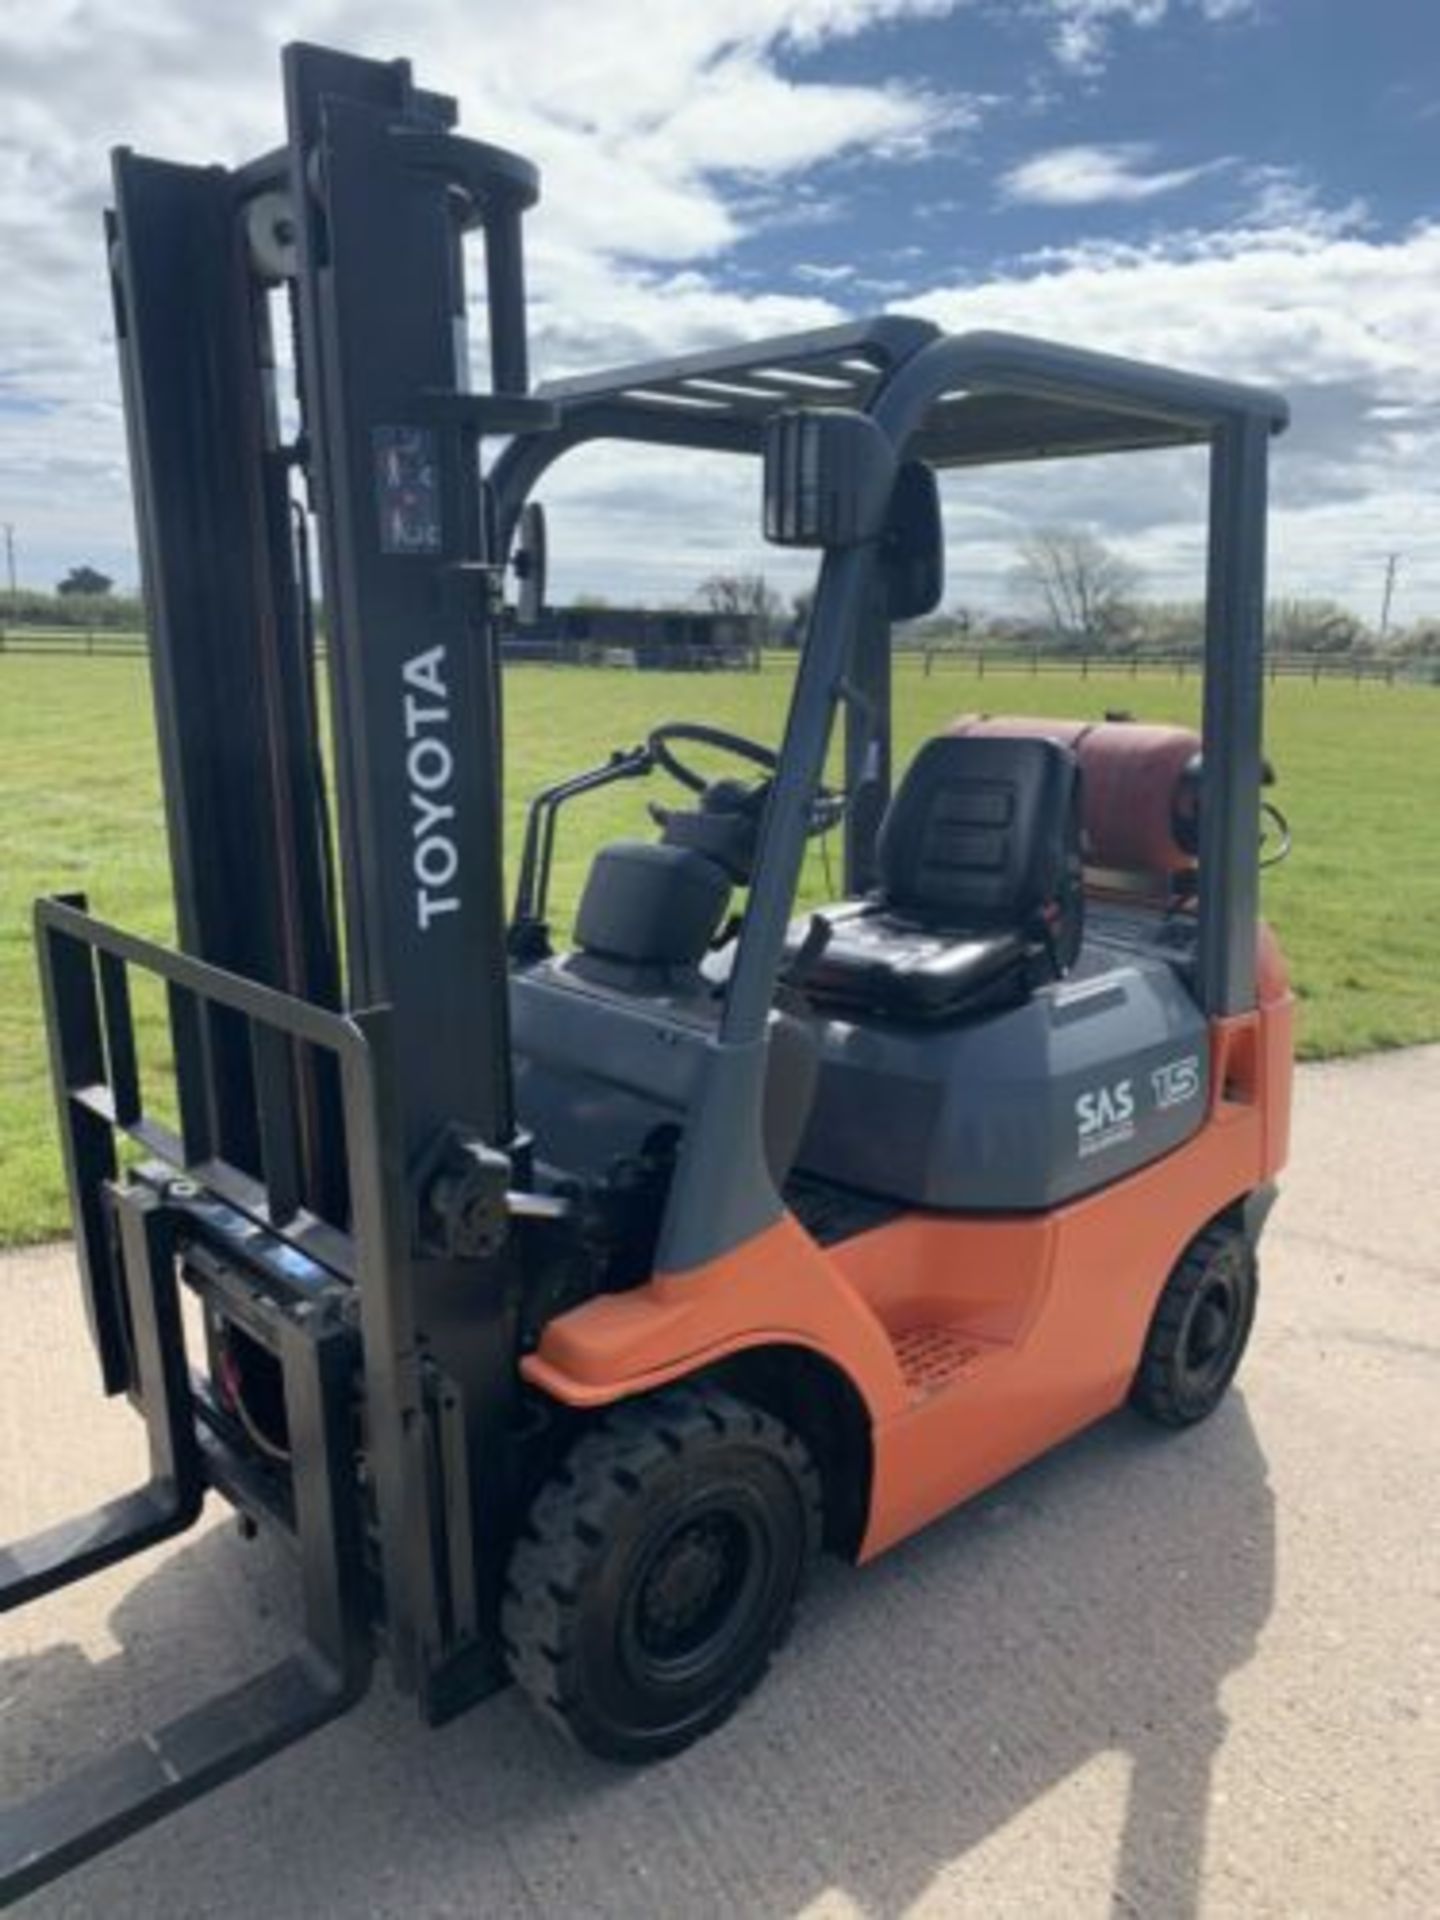 Toyota 1.5 Tonne Gas Forklift Truck - Image 2 of 6